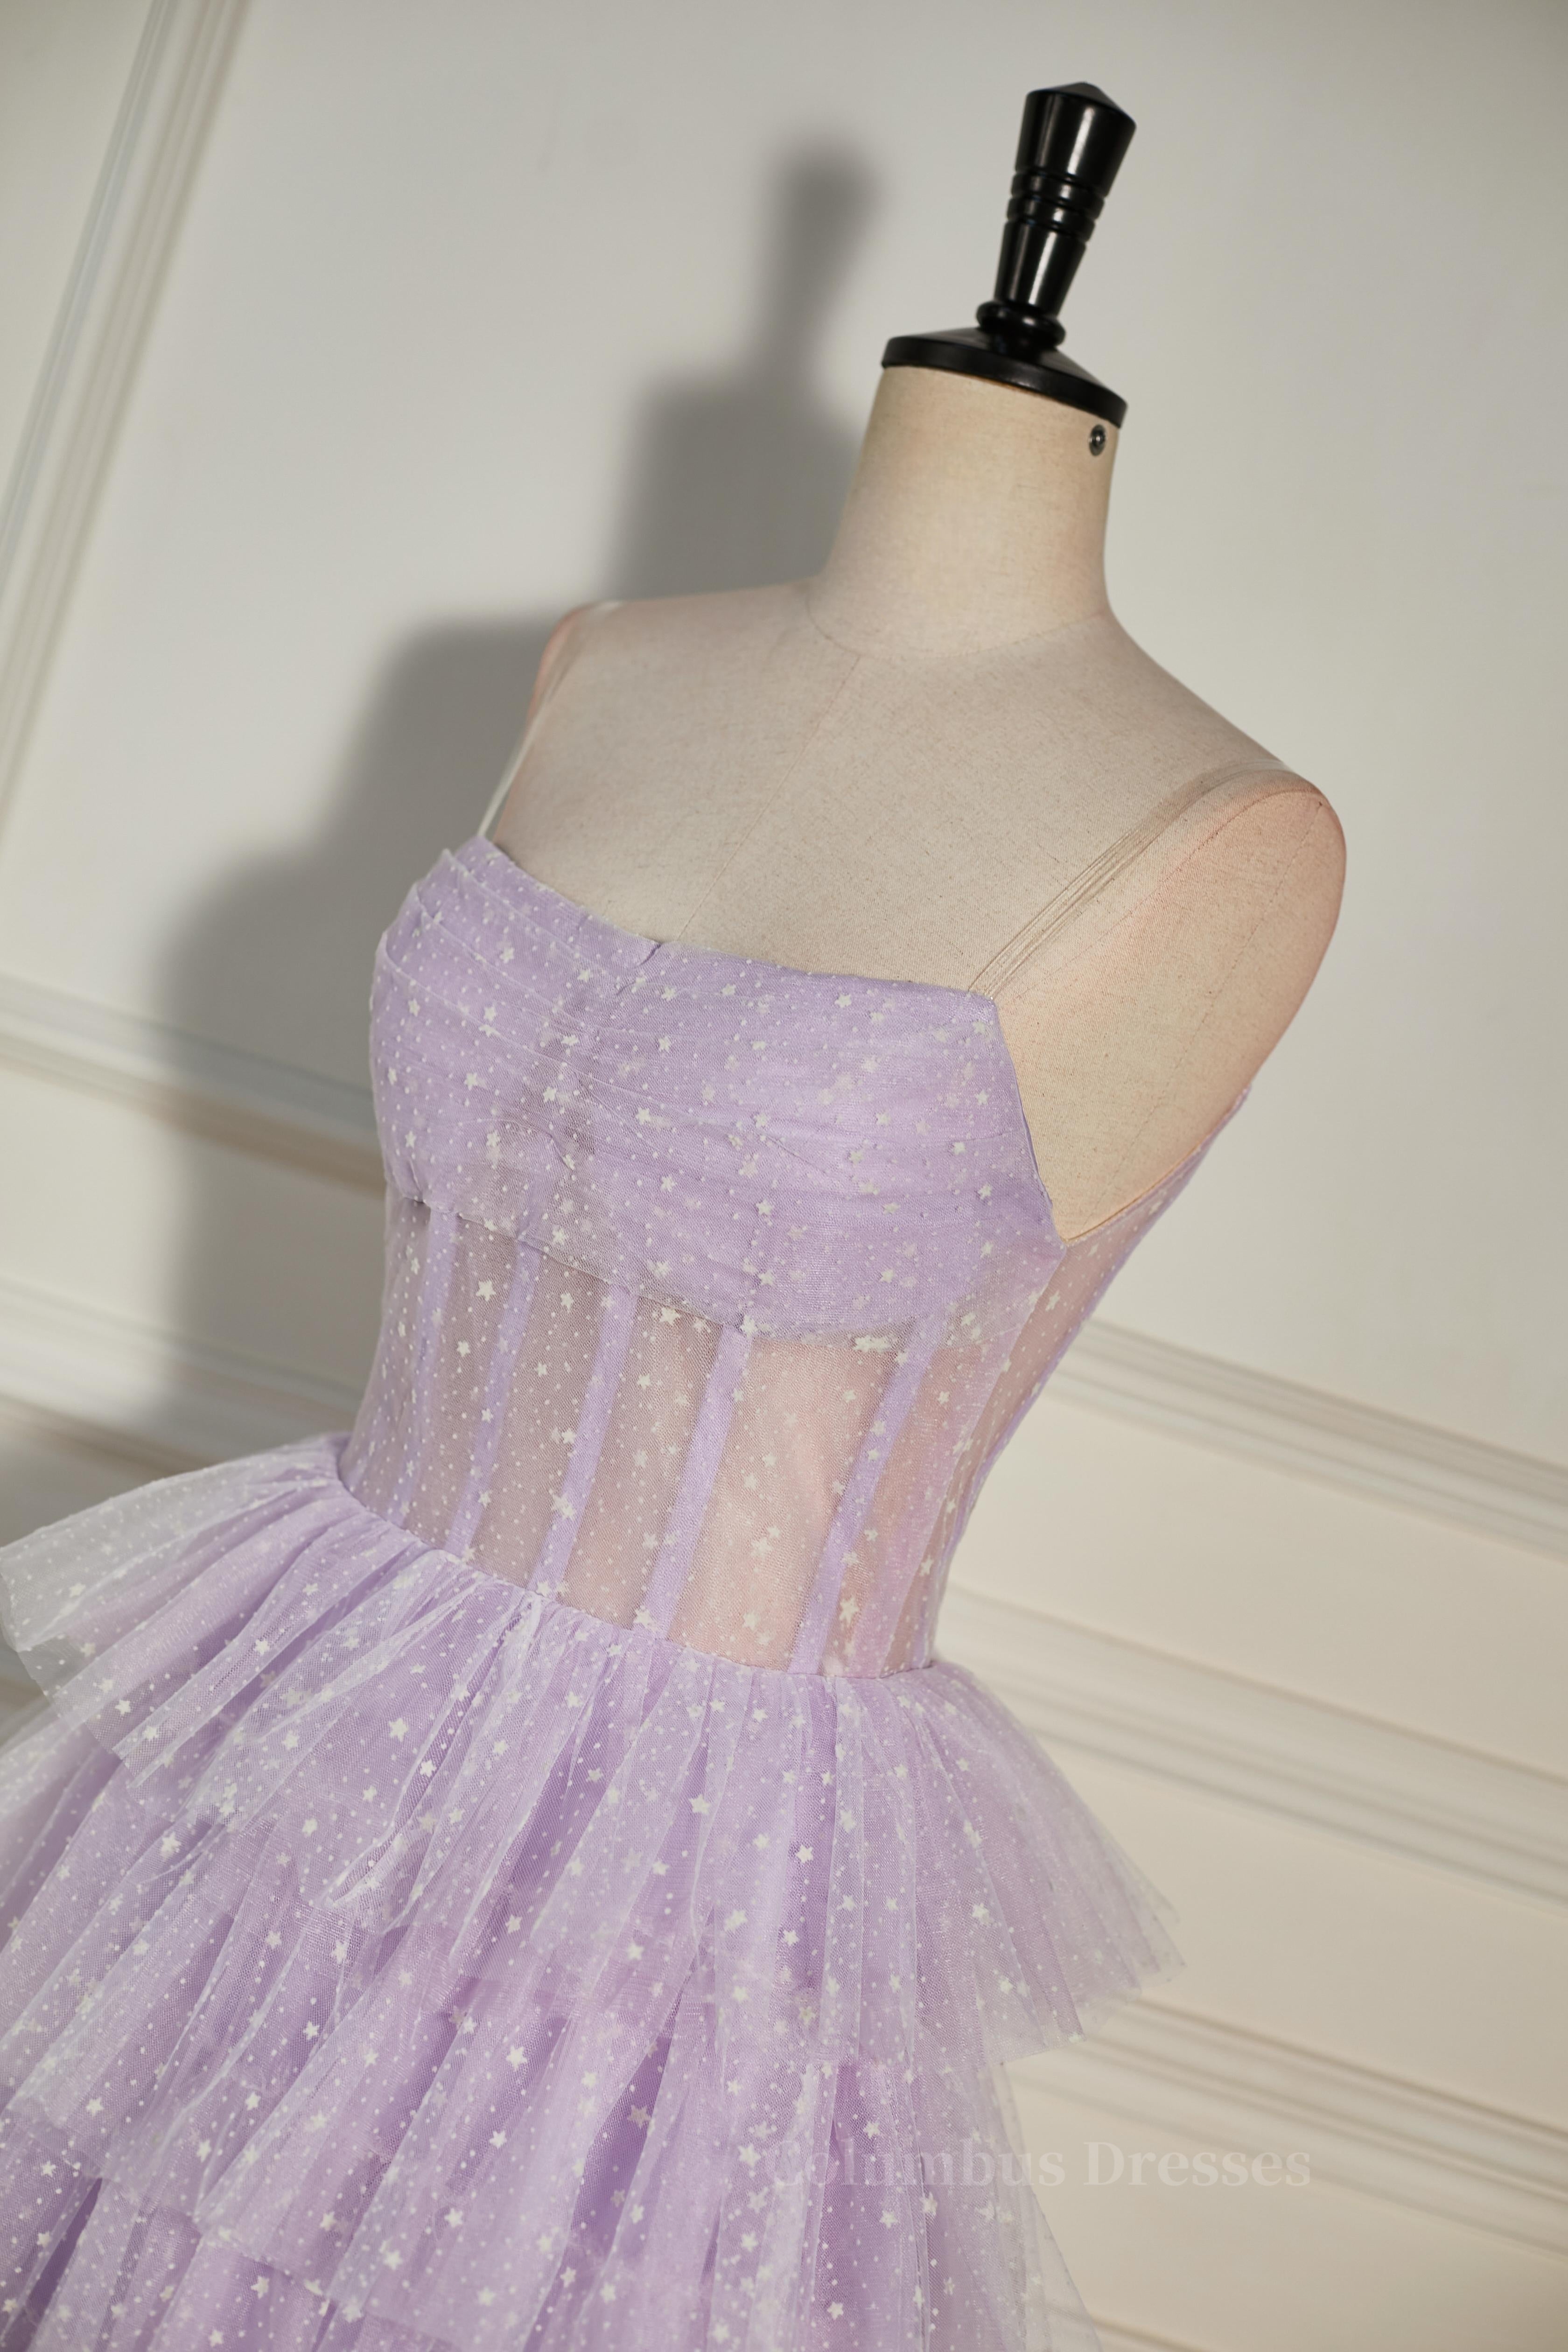 Party Dress Idea, Lavender Strapless Dot Tulle Multi-Layers Homecoming Dress